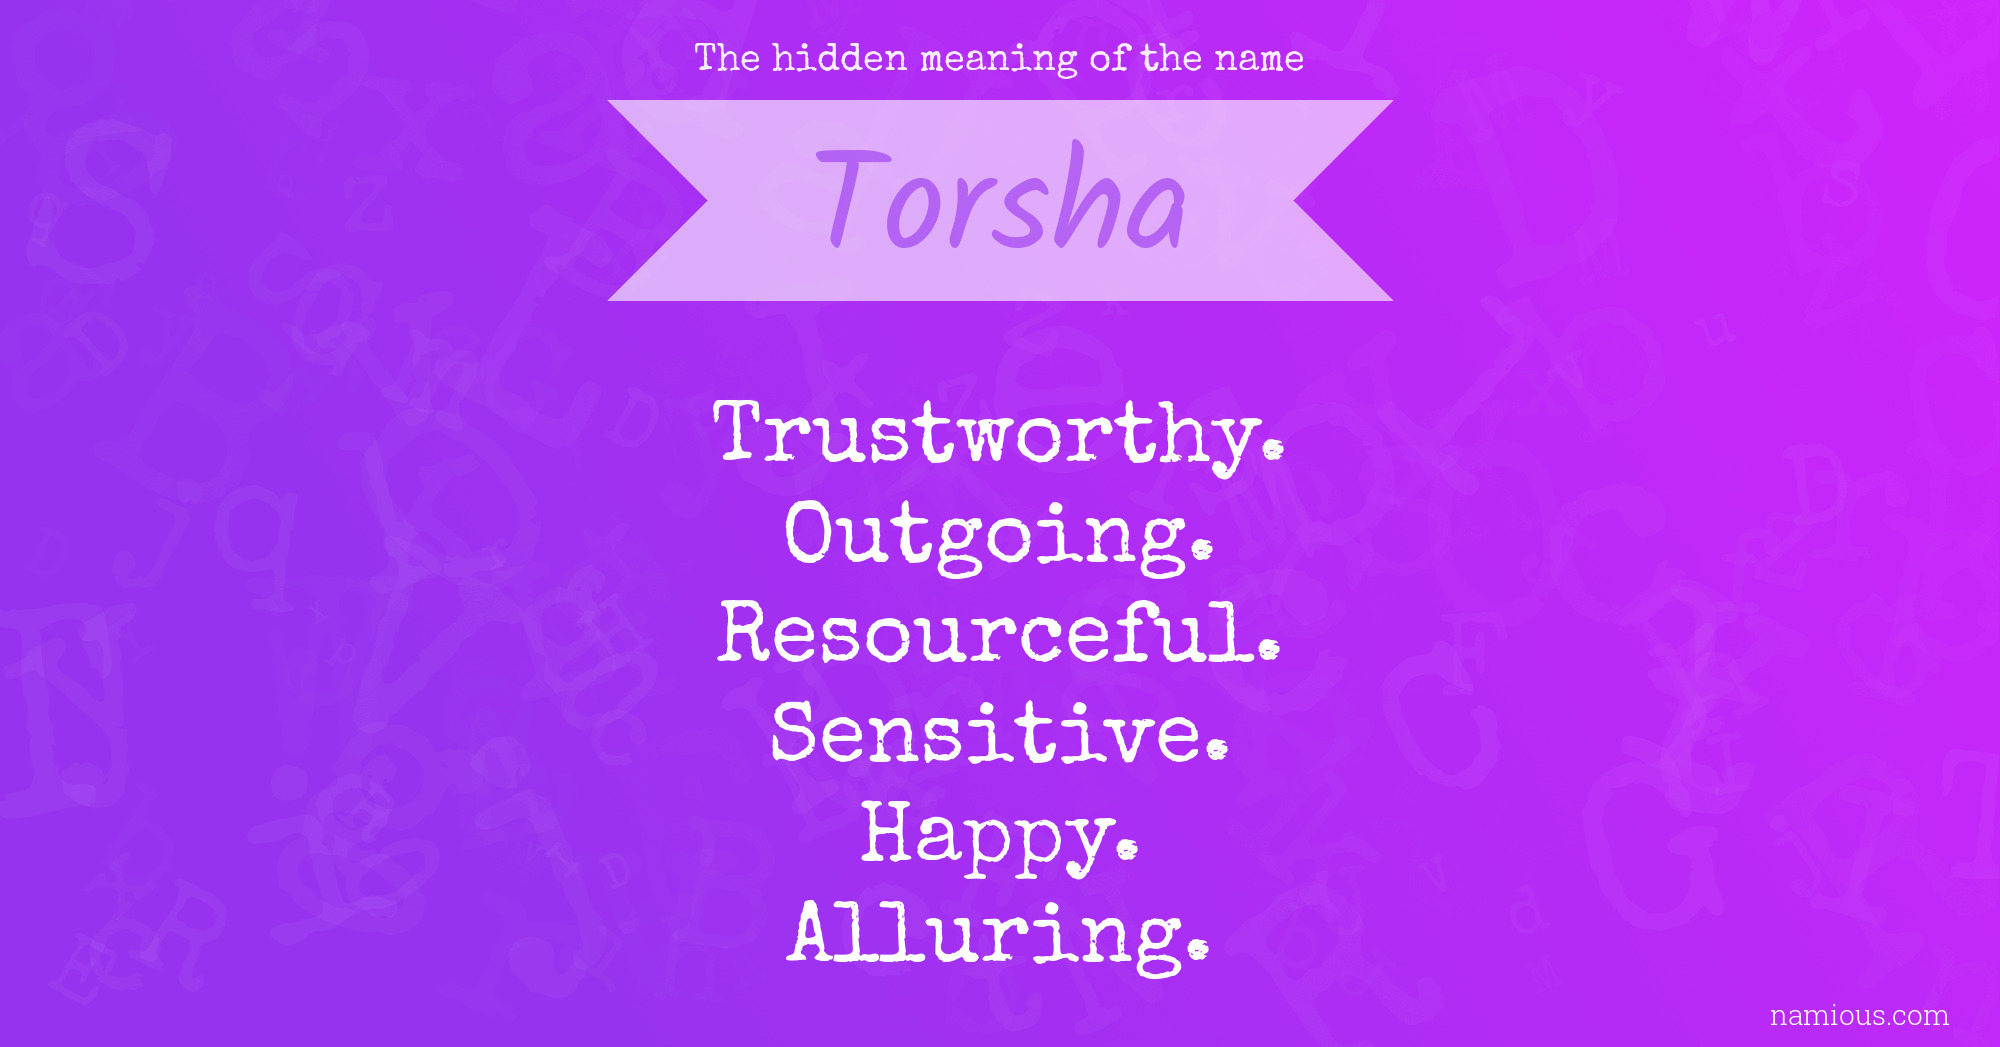 The hidden meaning of the name Torsha